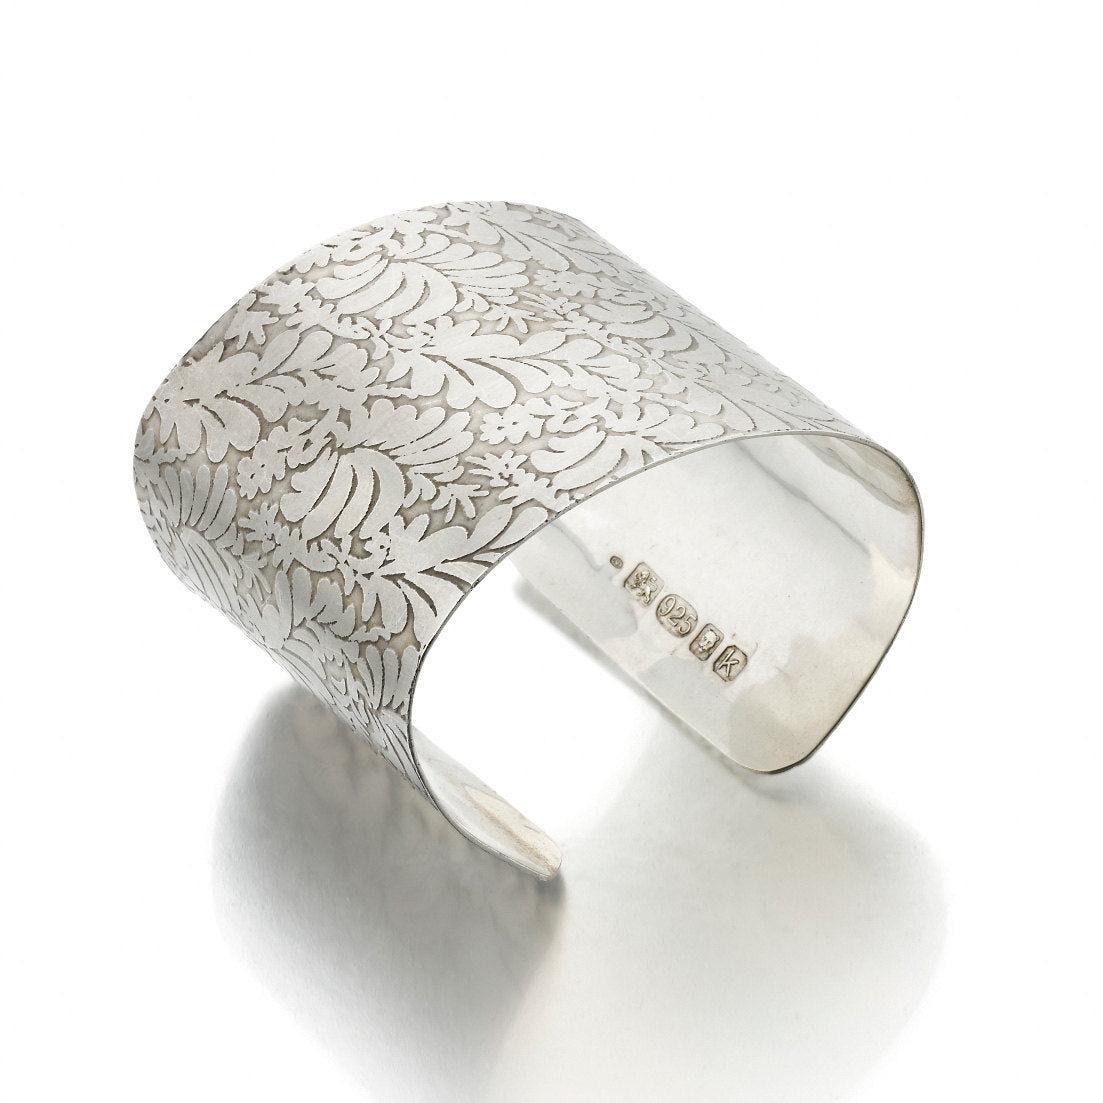 sterling silver Cuff Bracelet with Large Volutes engraved Photo etched floral pattern